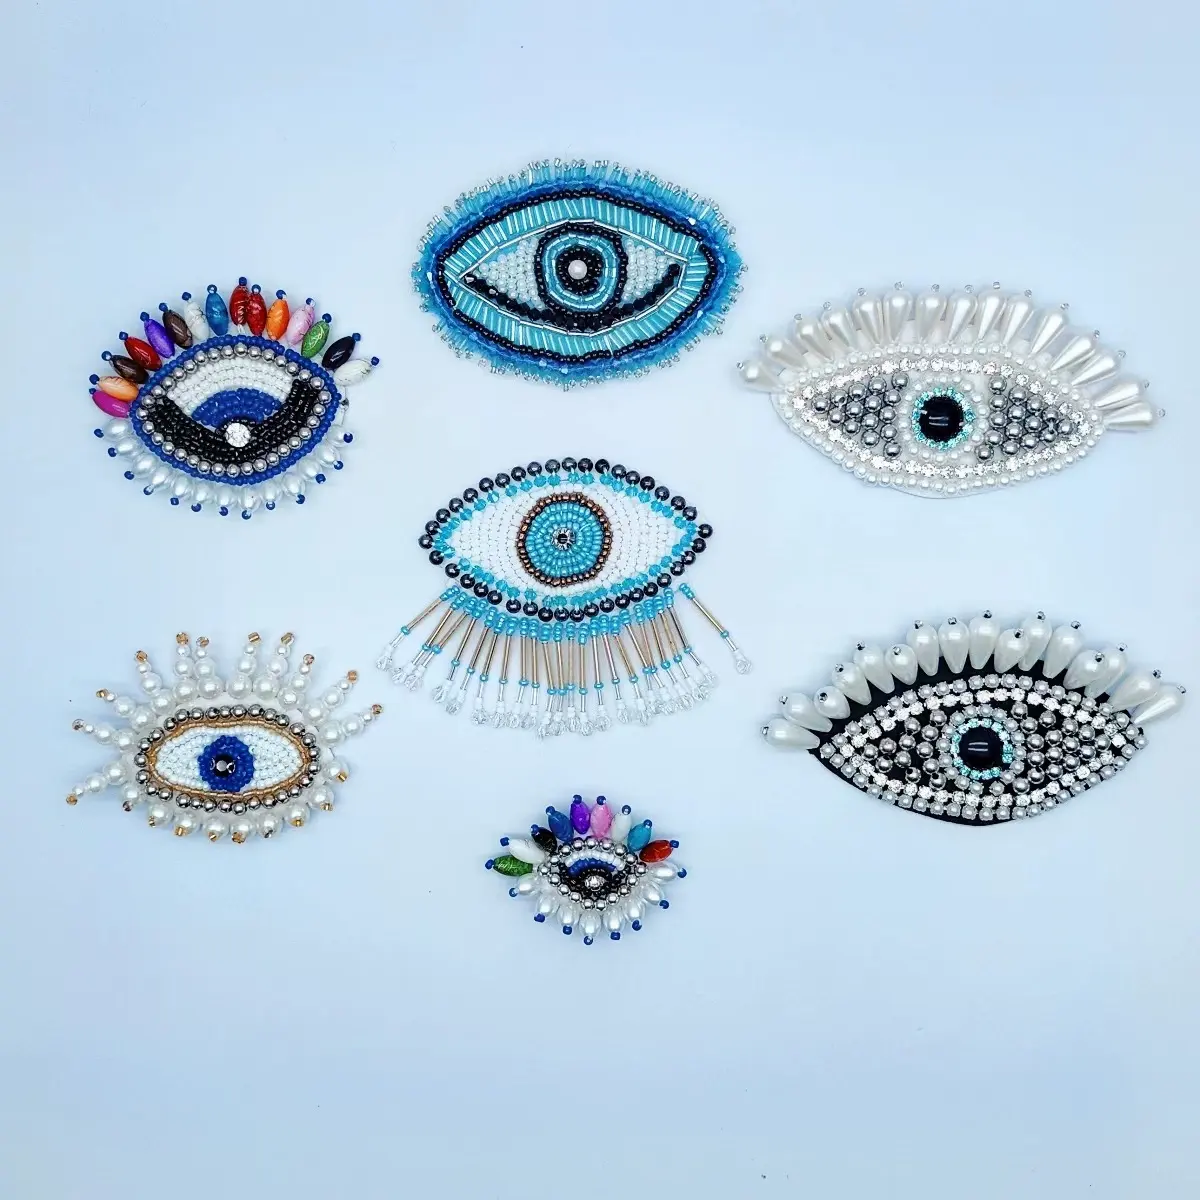 New Design Rhinestone Bead Evil Eyes Applique Clothing Embroidery Sew-on Patch Beaded Eye Patches for Jackets